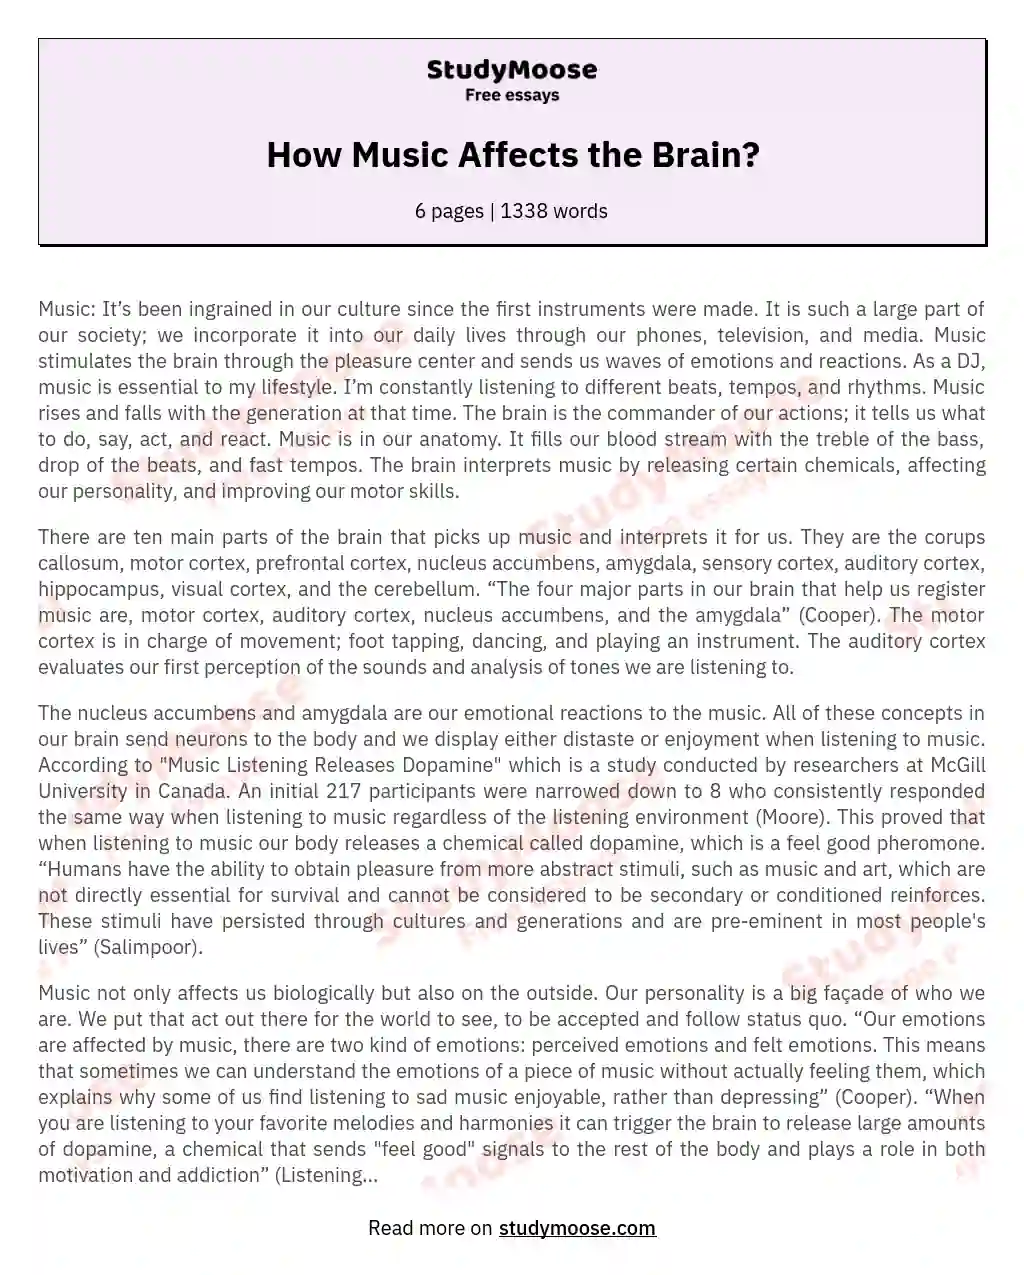 How Music Affects the Brain?